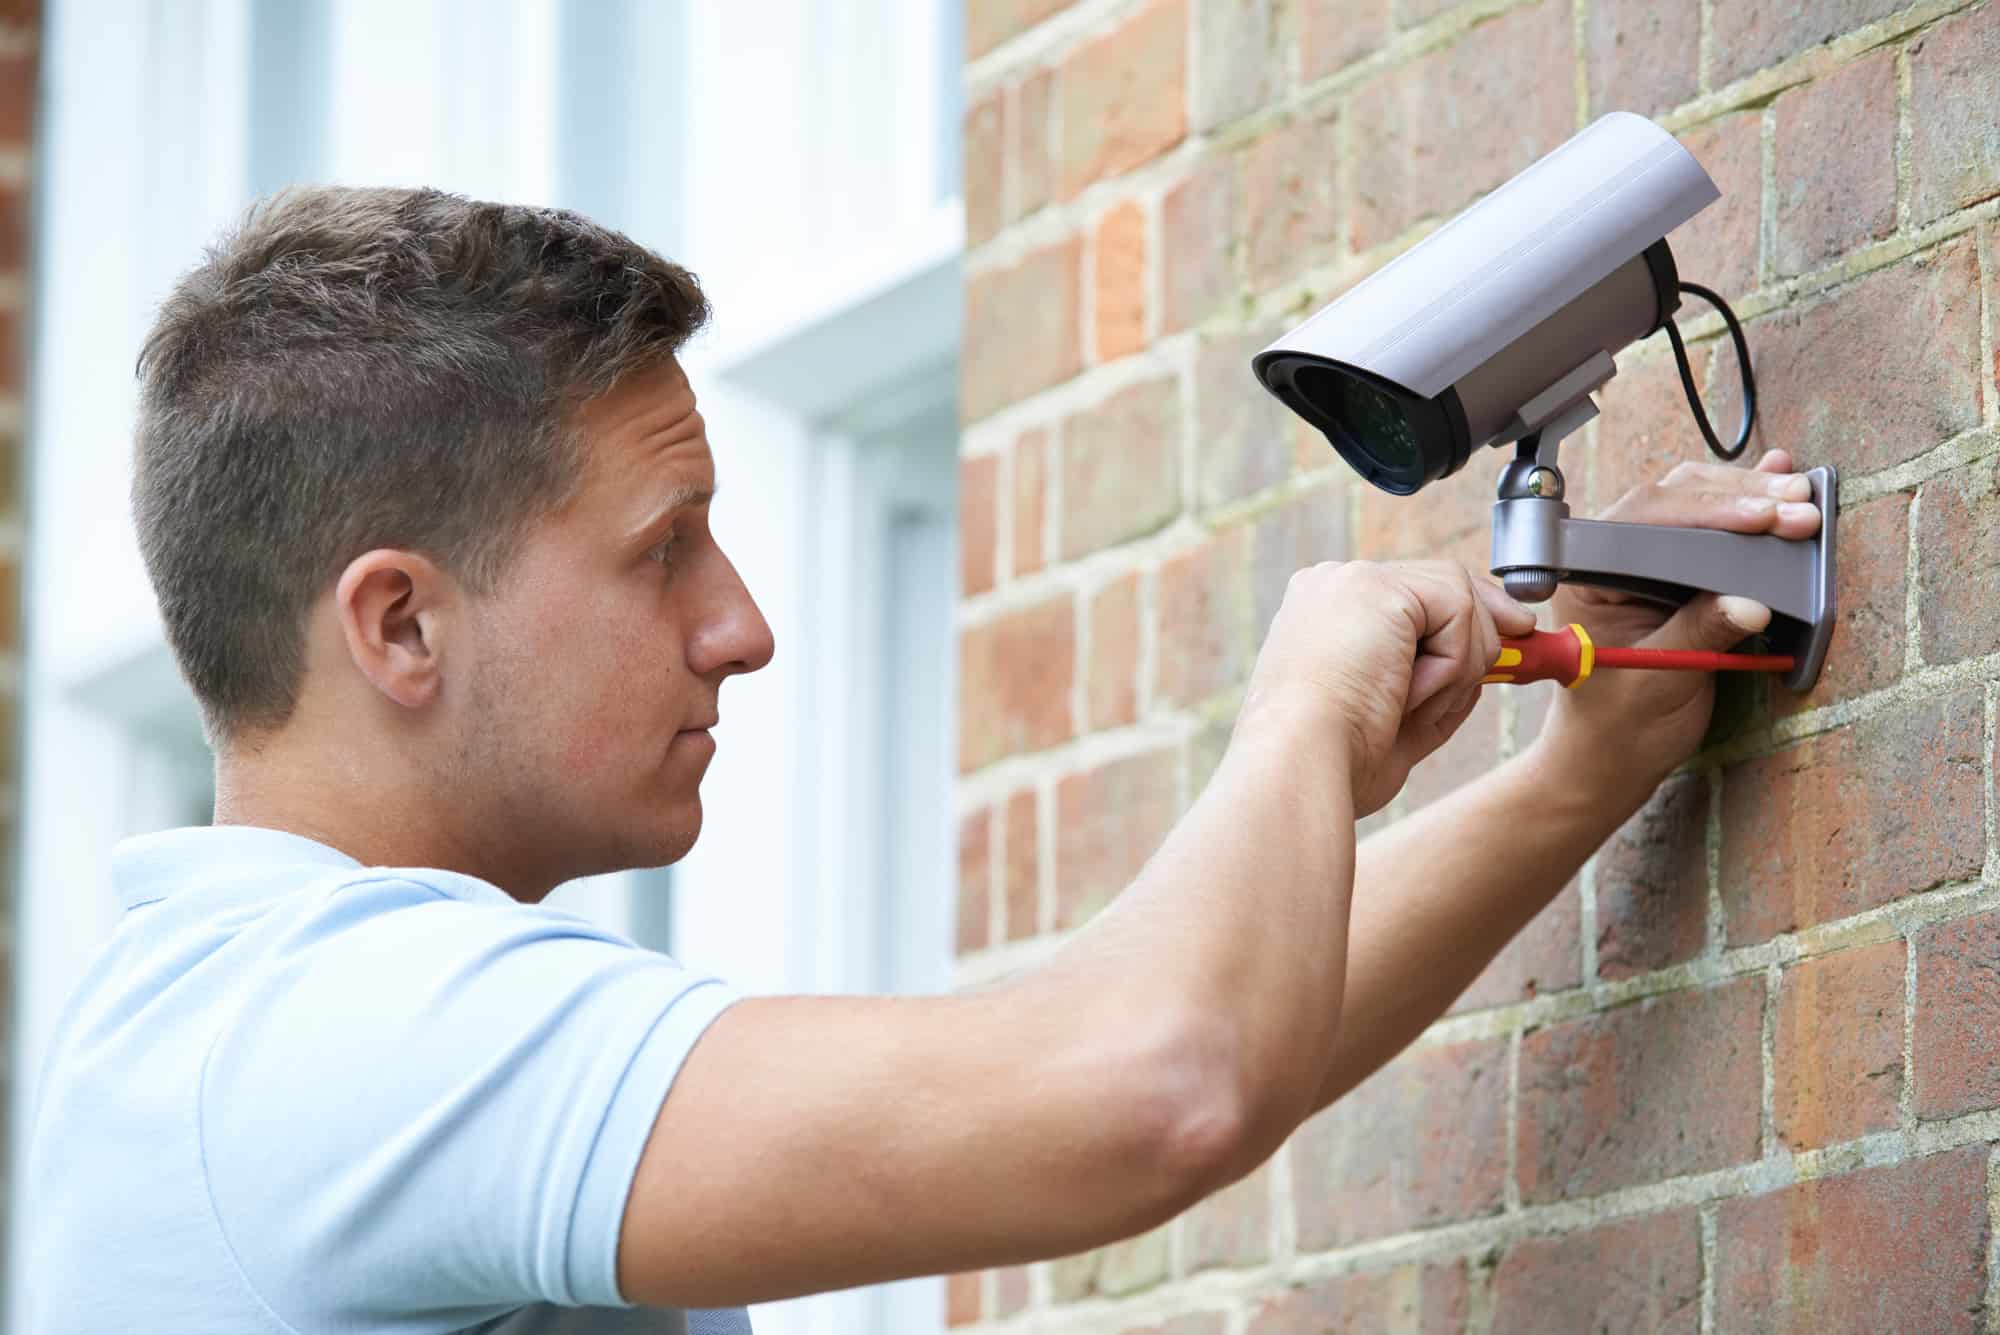 Cheapest Way To Install Security Cameras